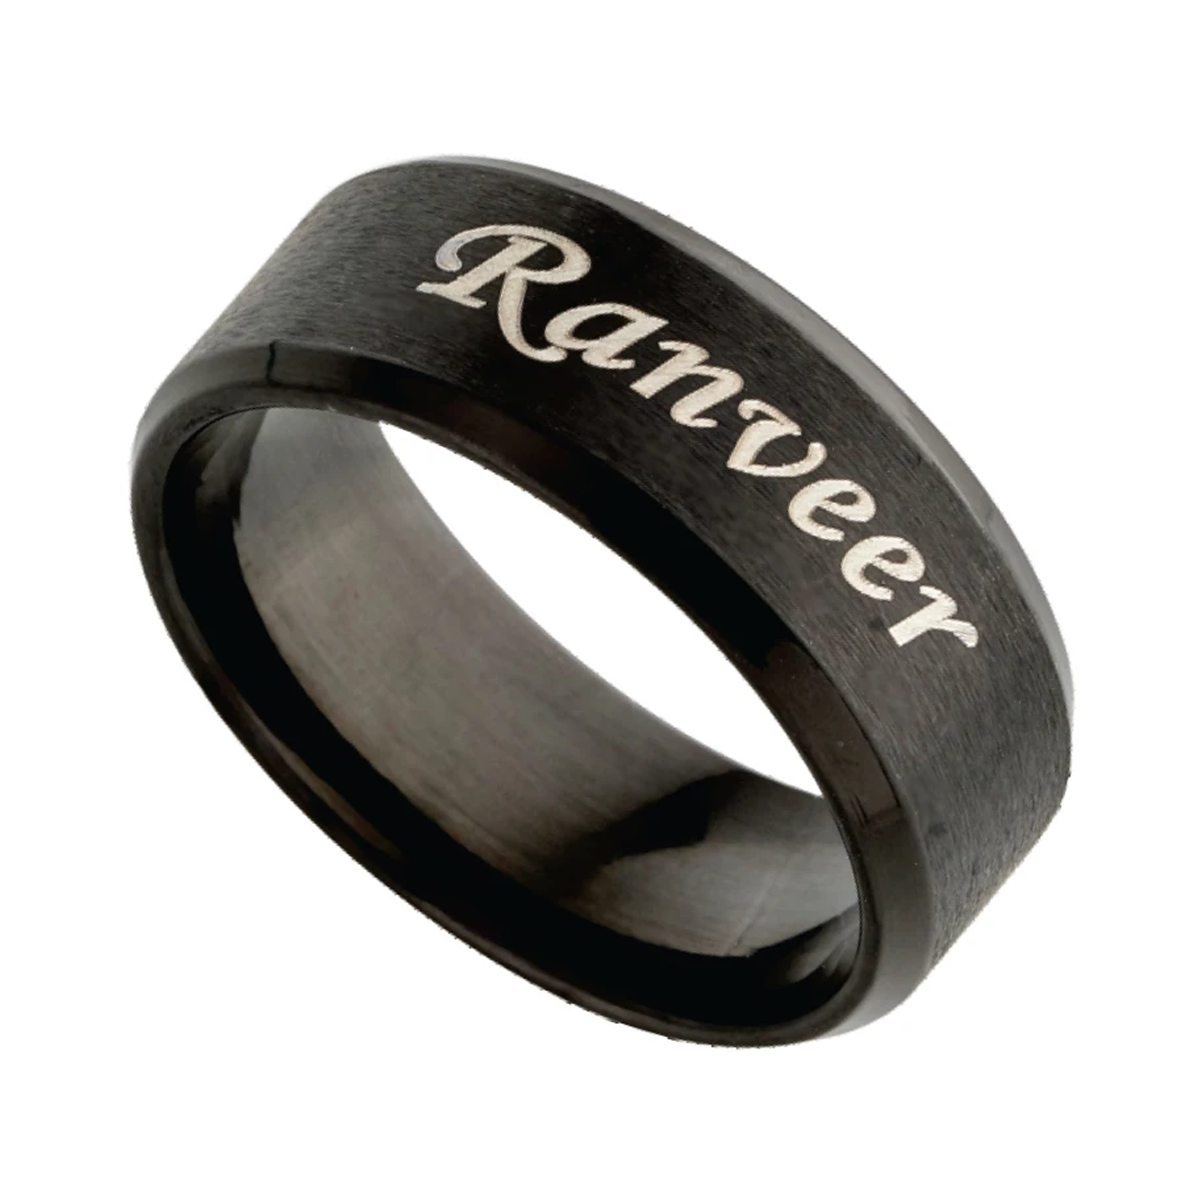 Buy Personalized Name Rings | Customised Rings by FNP